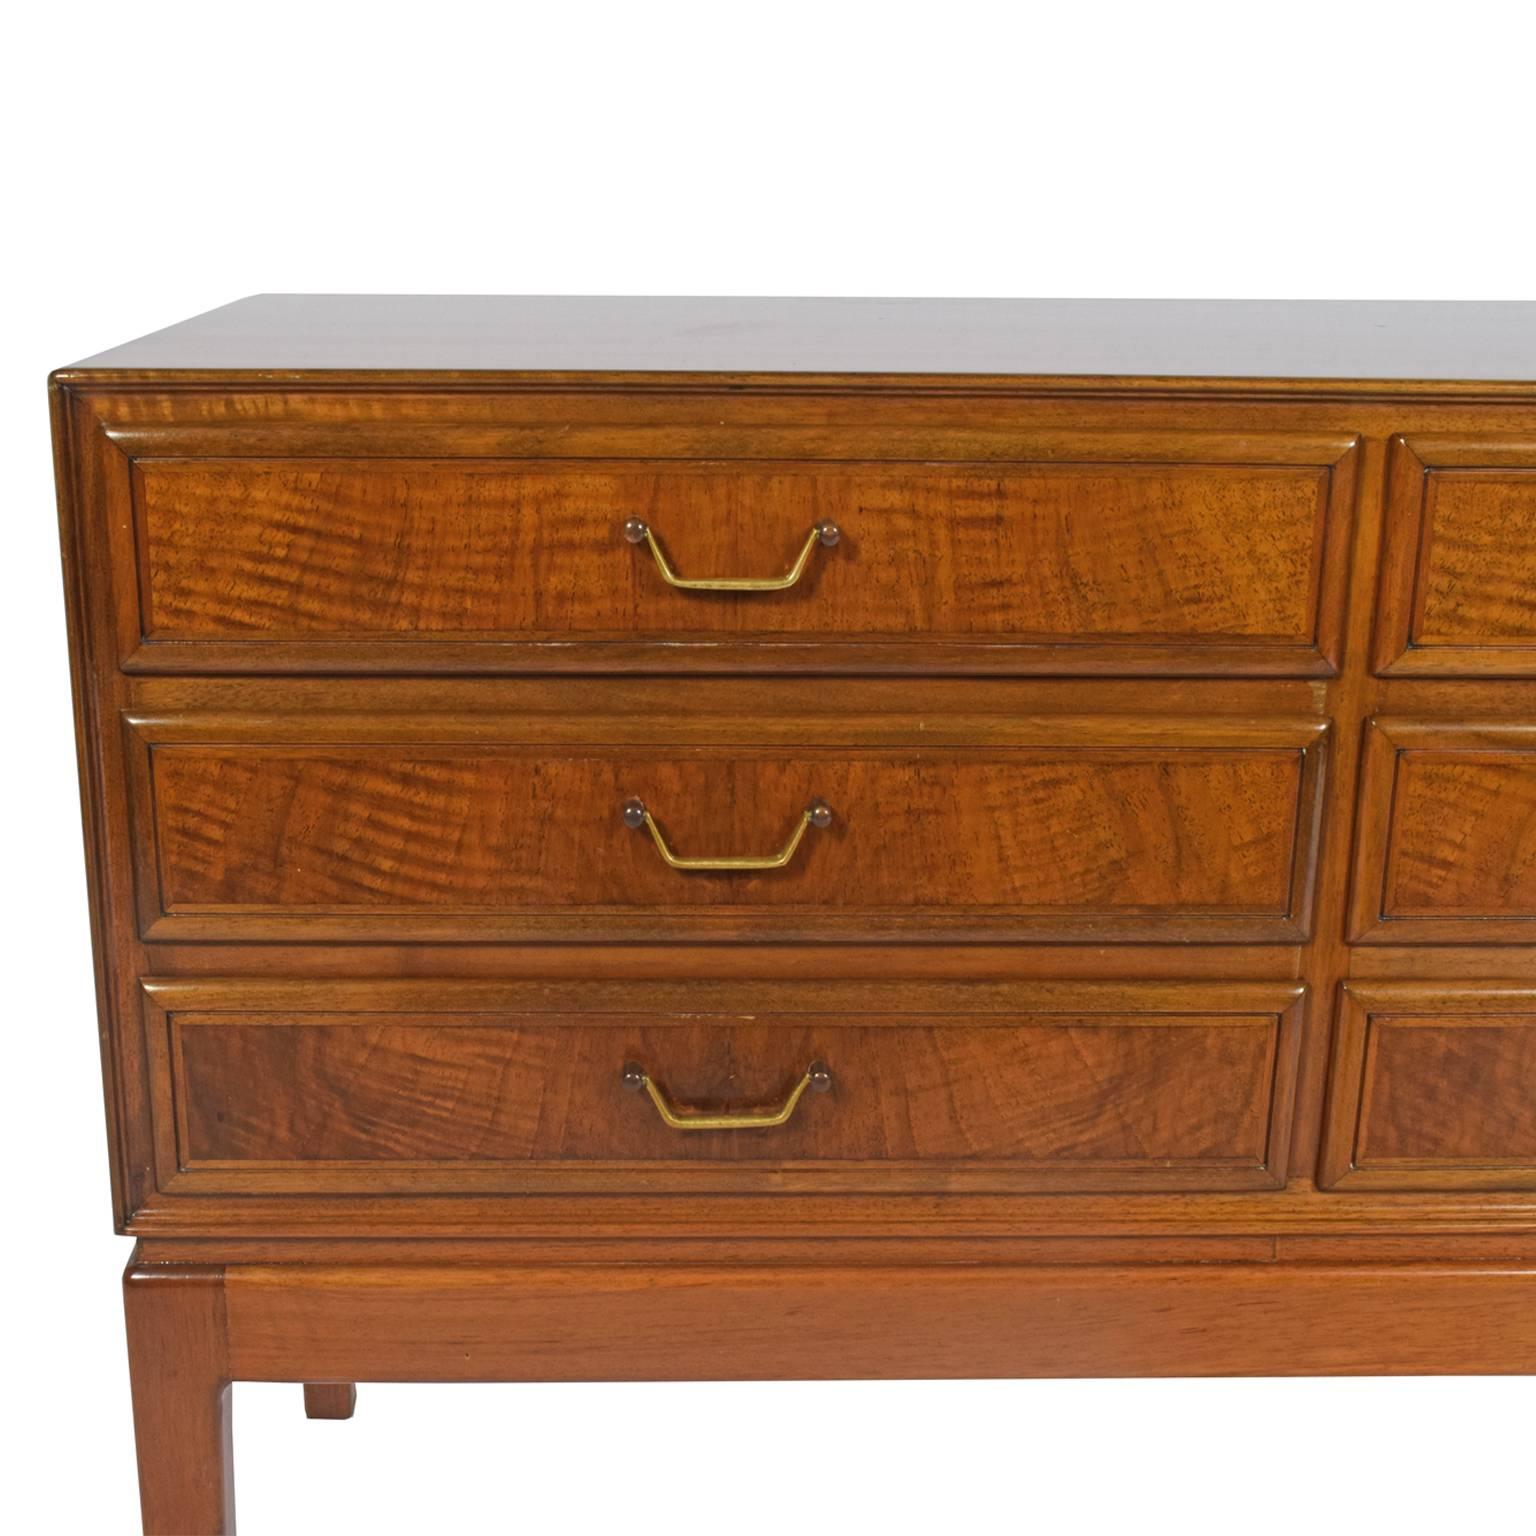 Six-drawer chest in walnut with brass pulls raised on solid walnut frame.